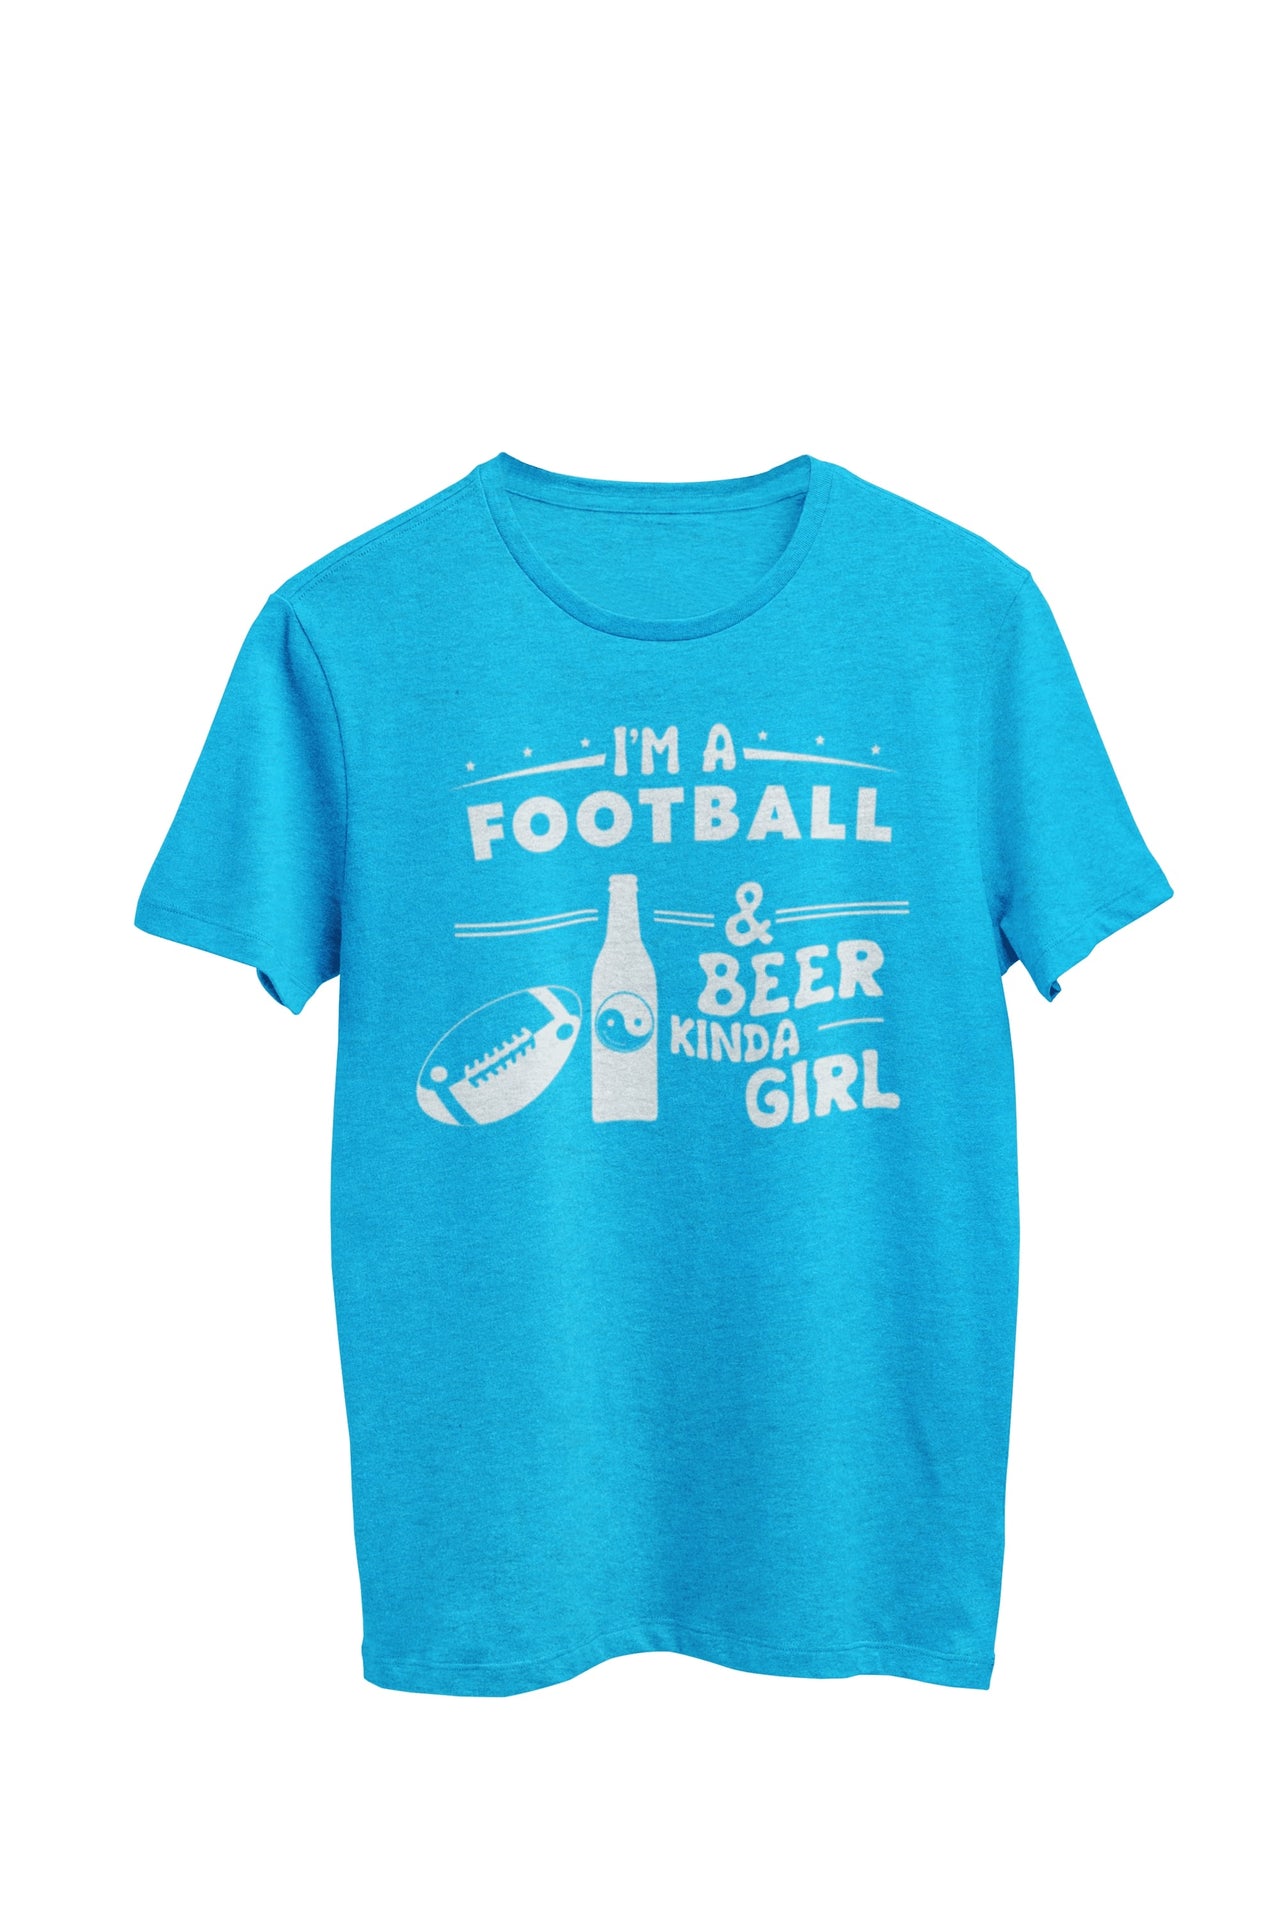 Turquoise Heather Unisex T-shirt with the text: 'I'm a football and beer kinda girl.' The design includes an image of a beer bottle with a yin yang symbol and a yin yang football, created by WooHoo Apparel.